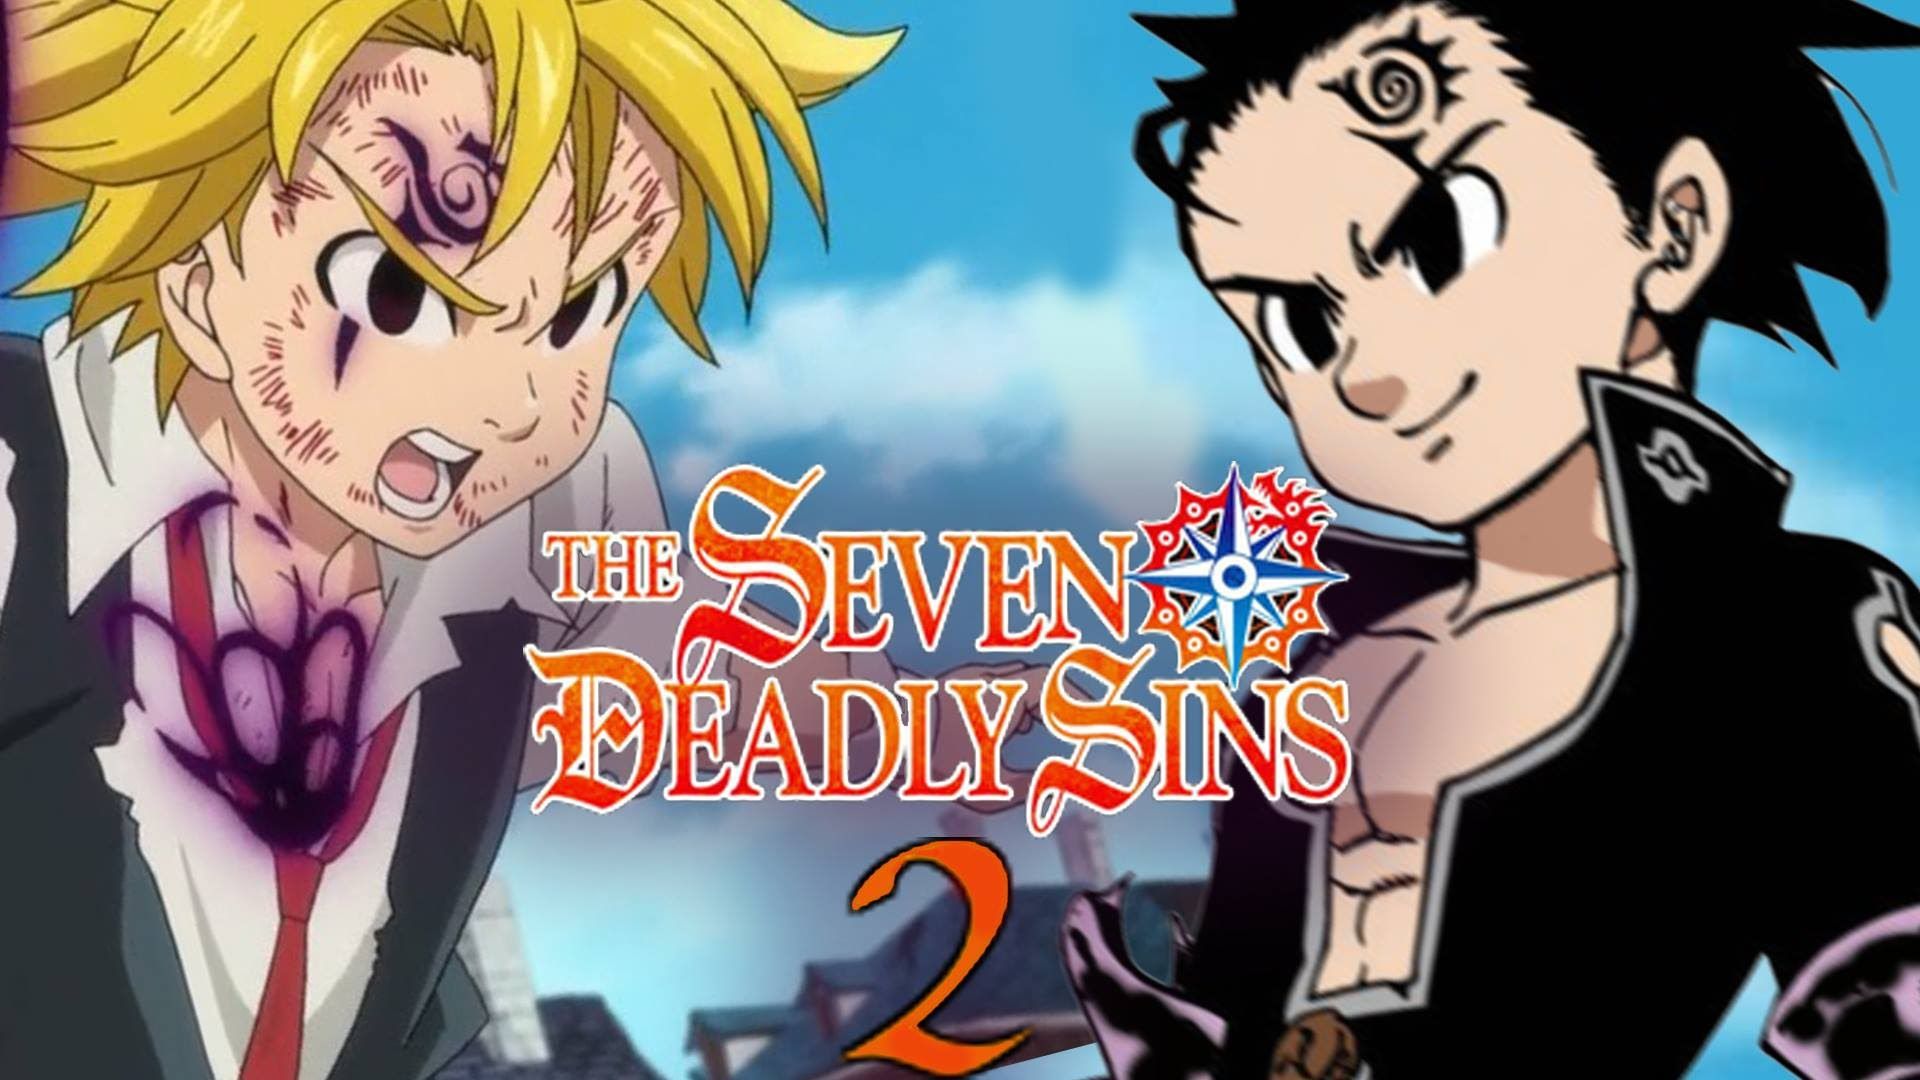 Seven Deadly Sins Manga Gets New Anime in October - News - Anime